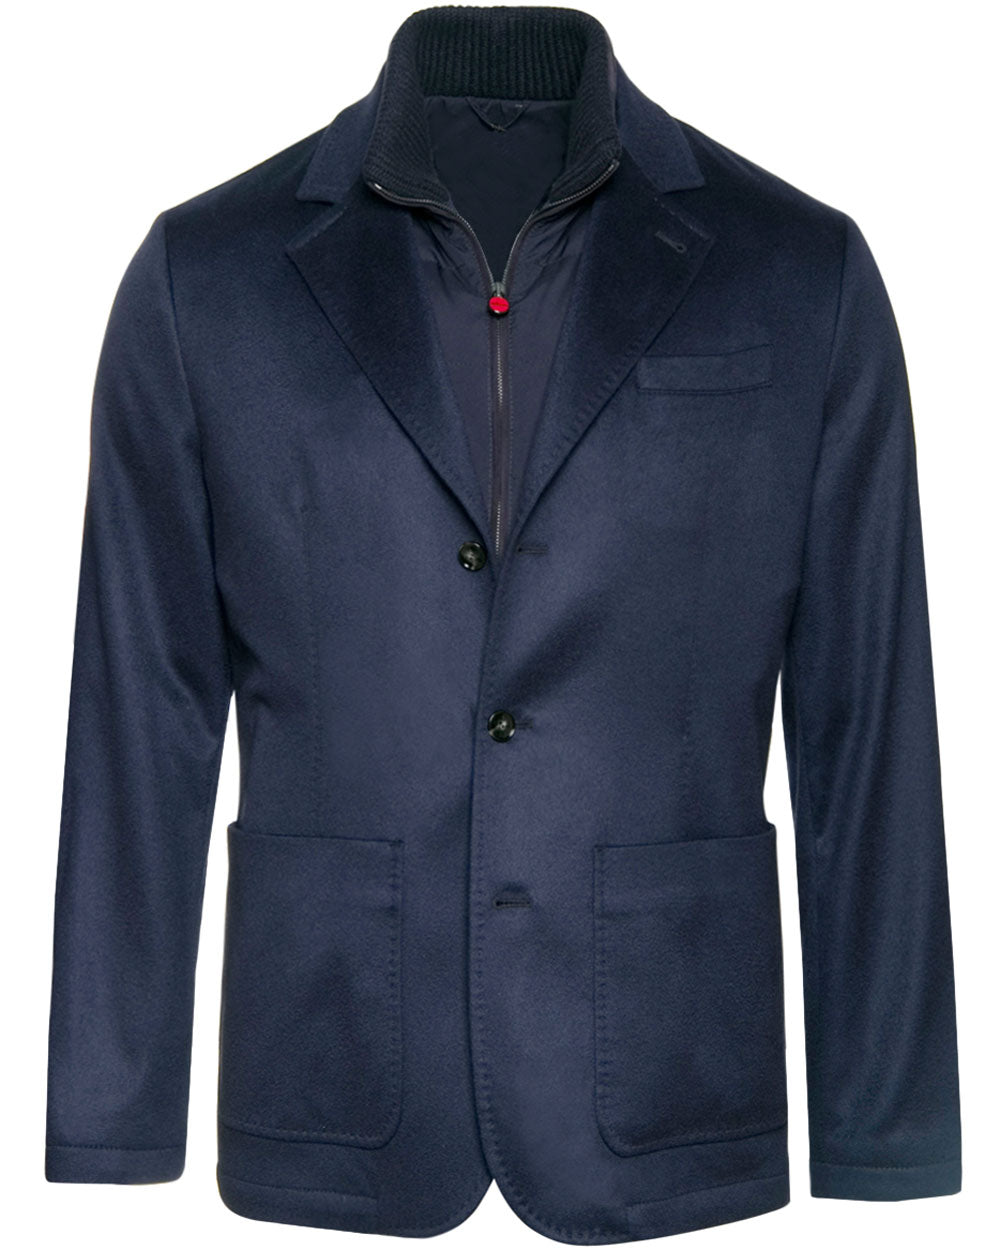 Navy Cashmere Jacket with Removable Puffer Vest